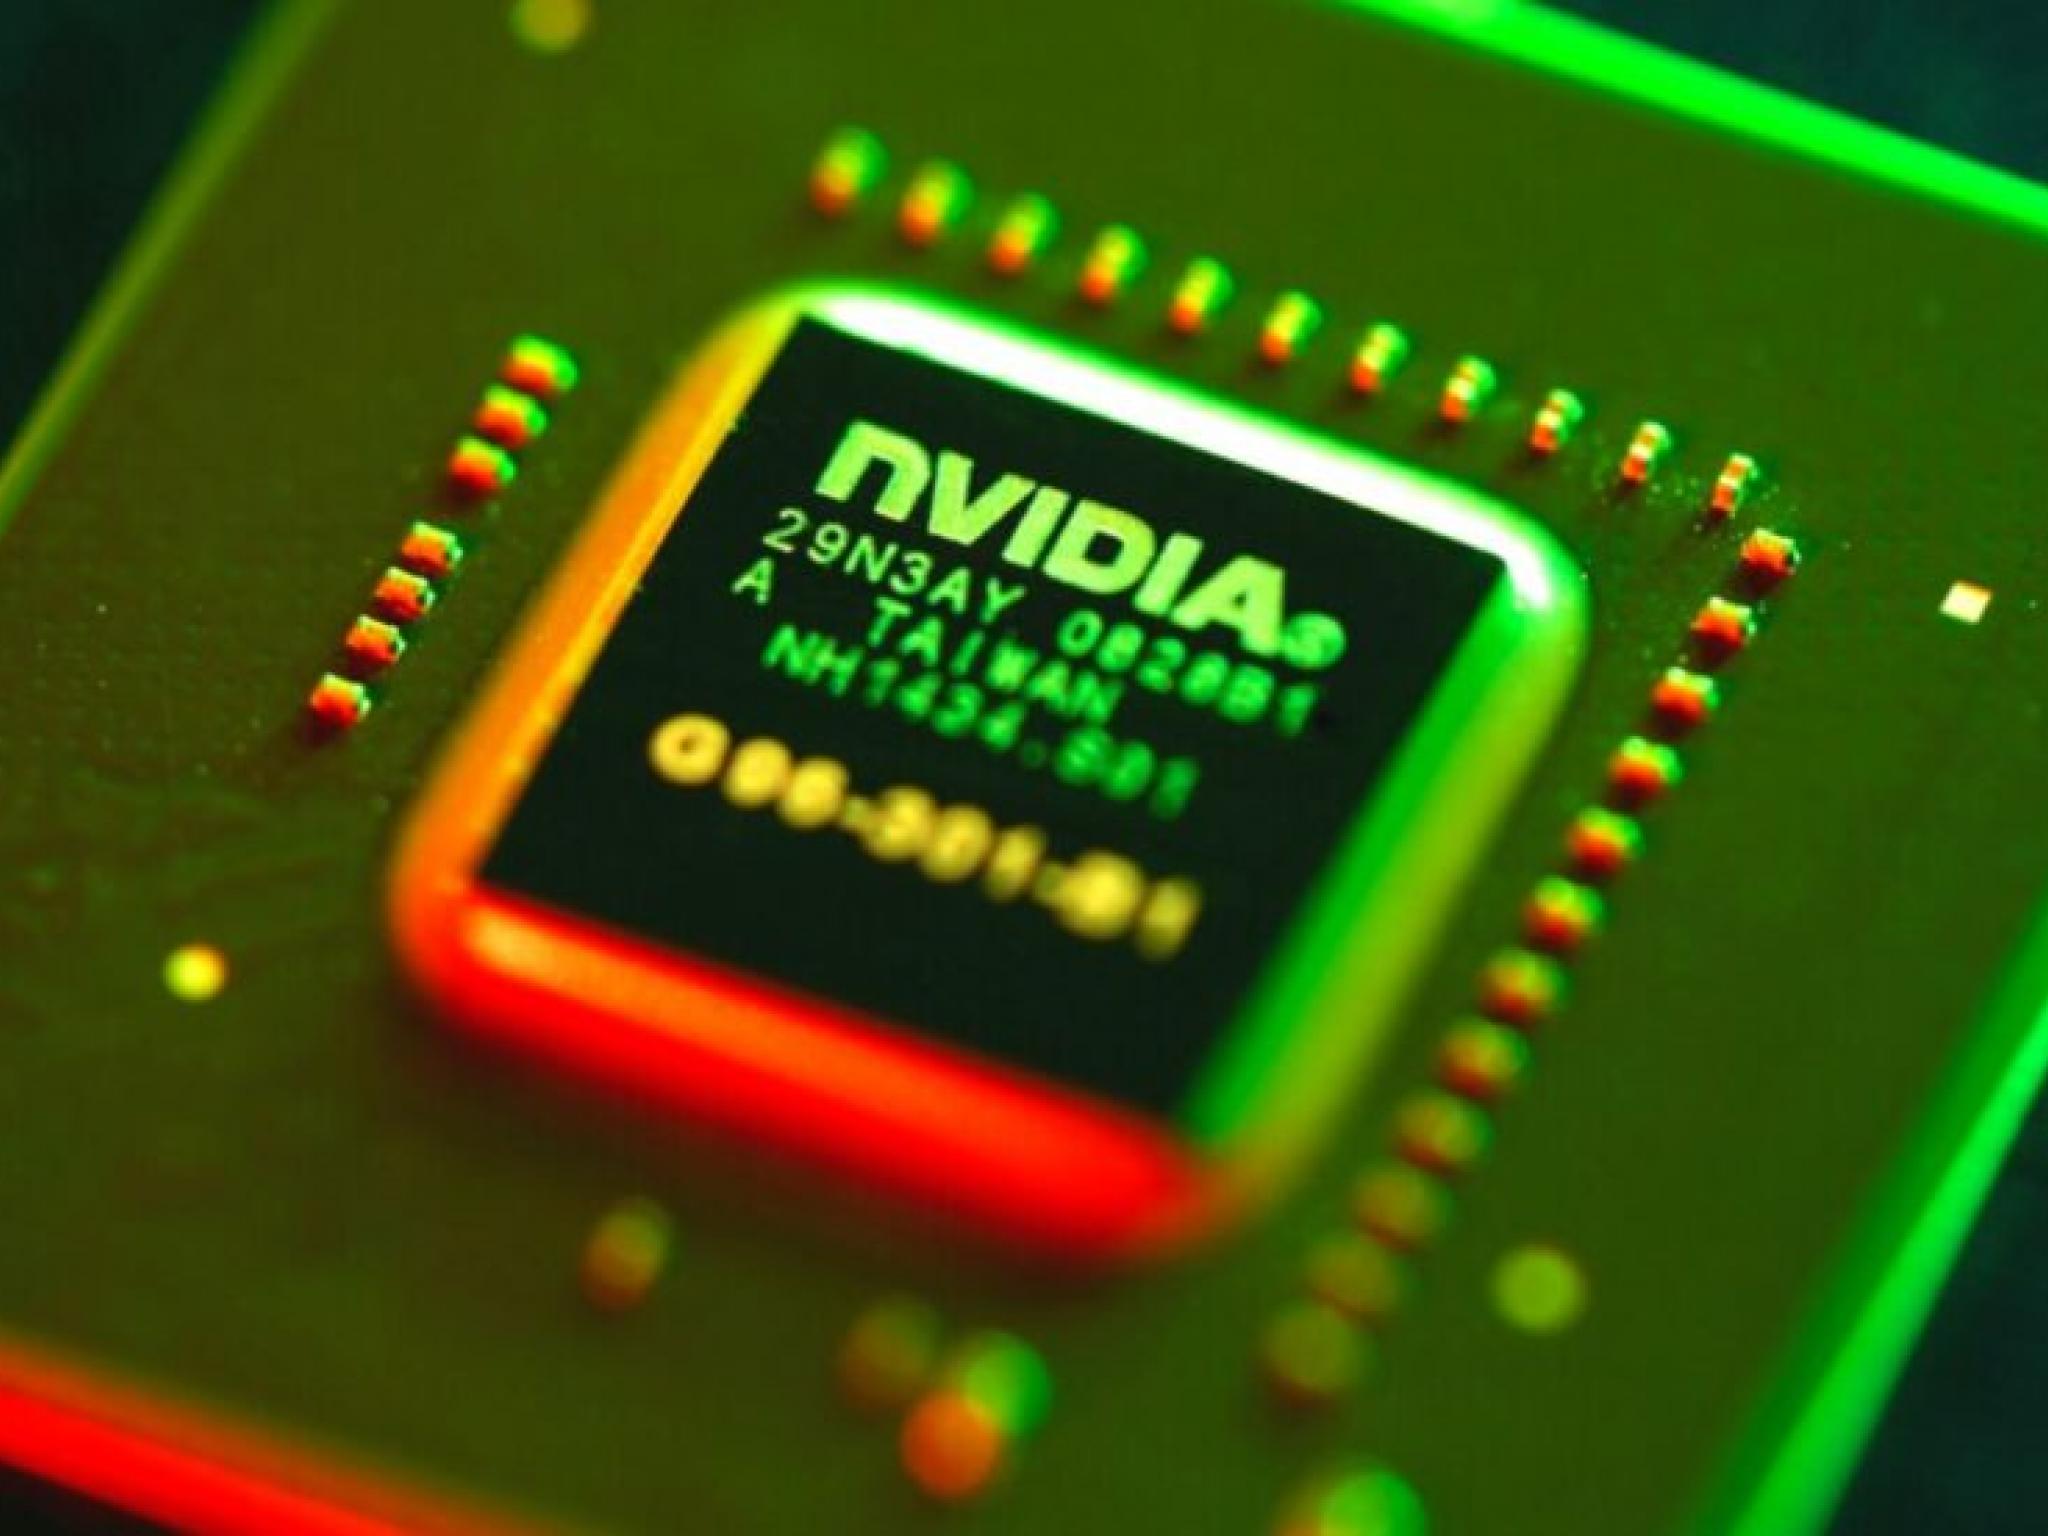  nvidias-new-blackwell-gpus-expected-to-boost-future-revenues-analyst-forecasts 